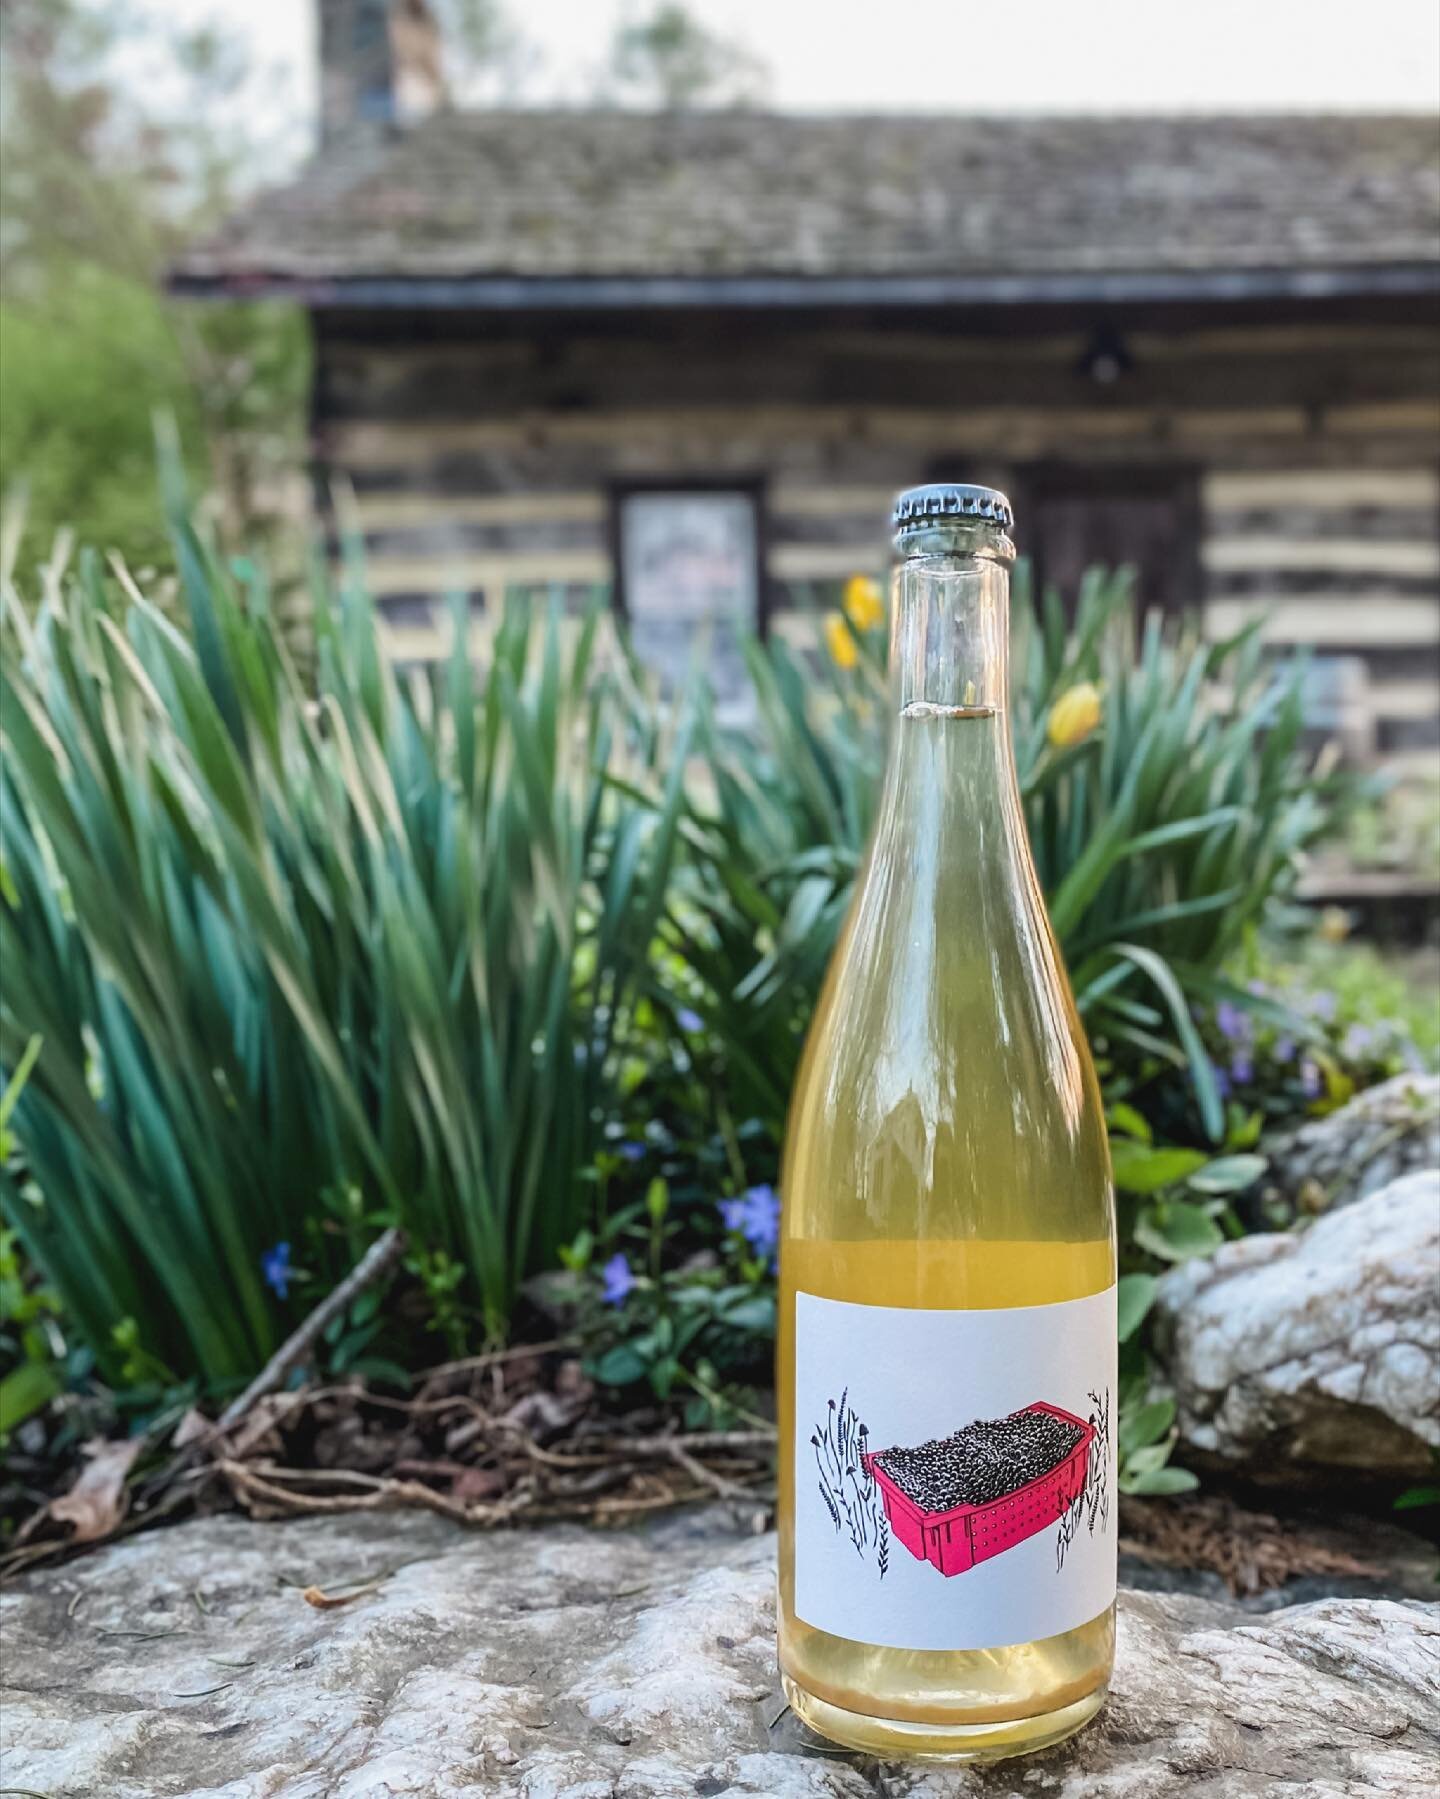 In case you missed it: bright, juicy, bubbly Vidal Blanc p&eacute;t-nat (with a teeny bit of Petit Manseng) is available for all your spring patio sipping needs. This was a bit of an experiment this year, and we love how this one turned out. ✨You can